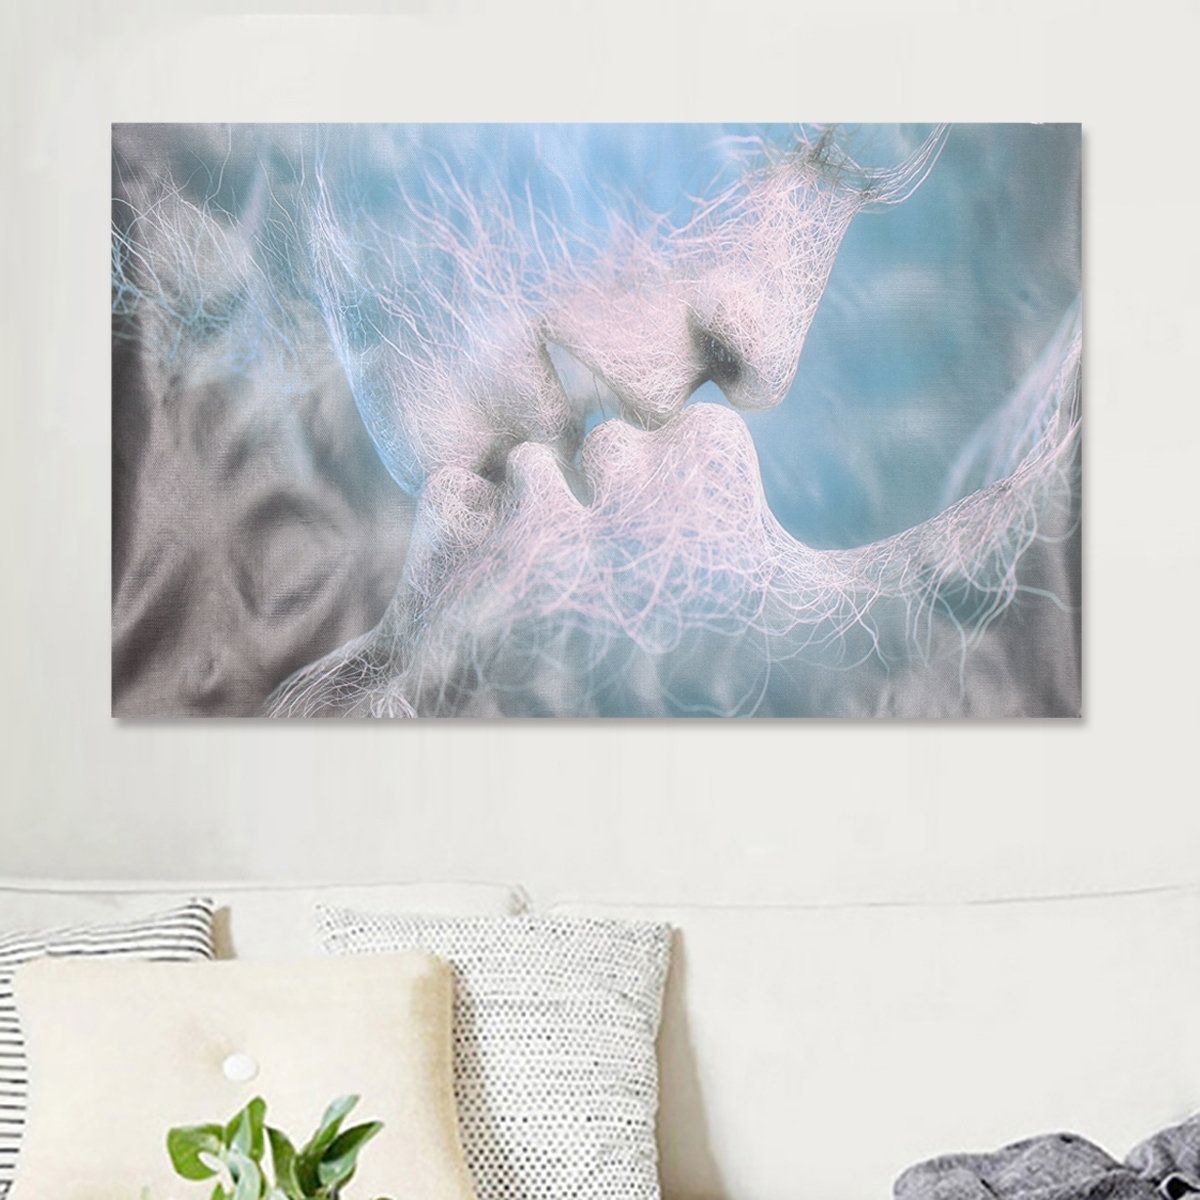 Blue Love Kiss Abstract Art On Canvas Painting Wall Art Picture Throughout Newest Textile Wall Art (View 10 of 15)